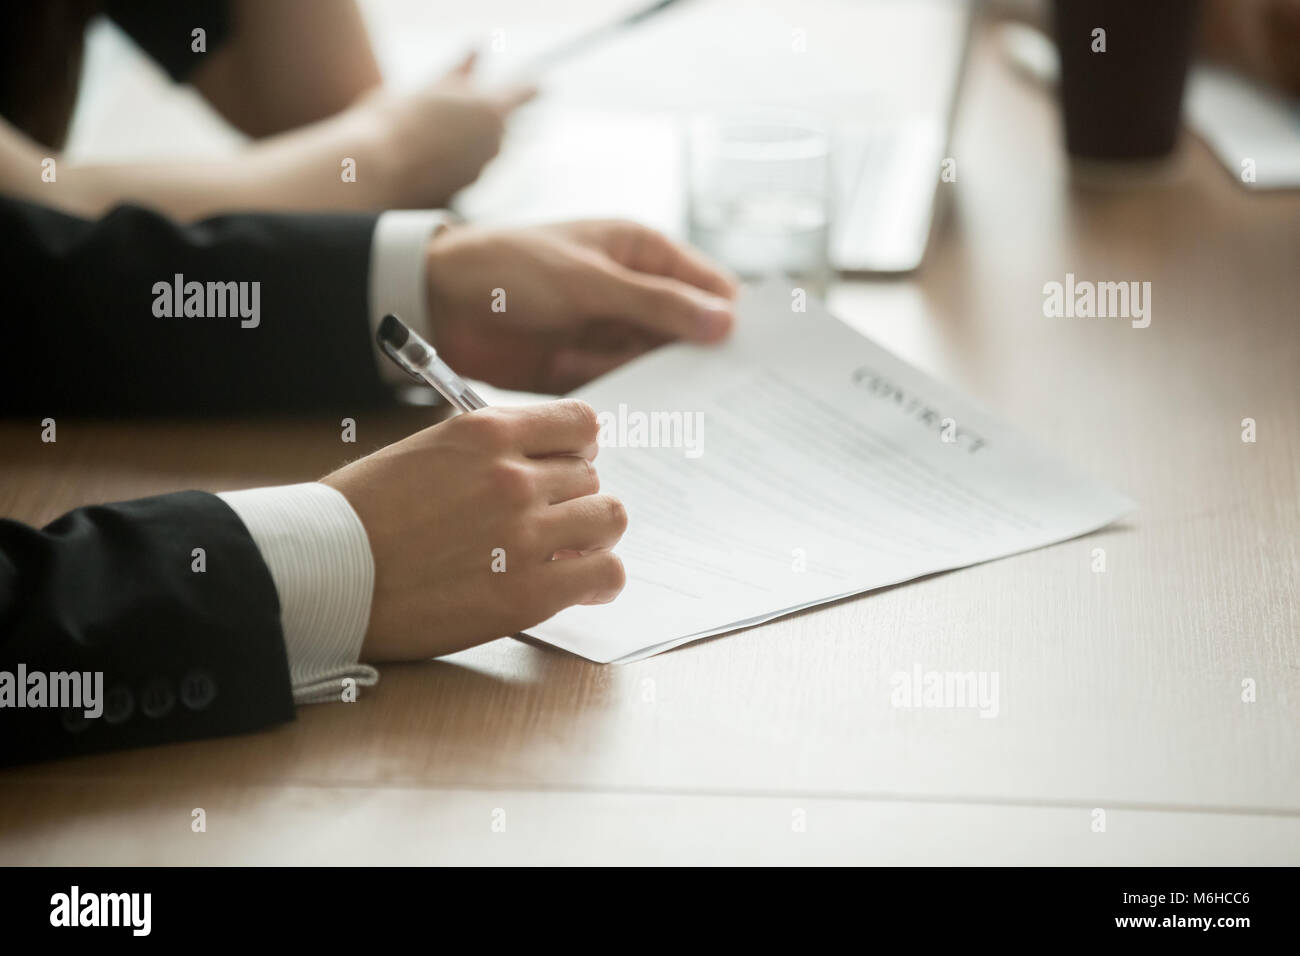 Businessman signing business contract concept, close up view Stock Photo